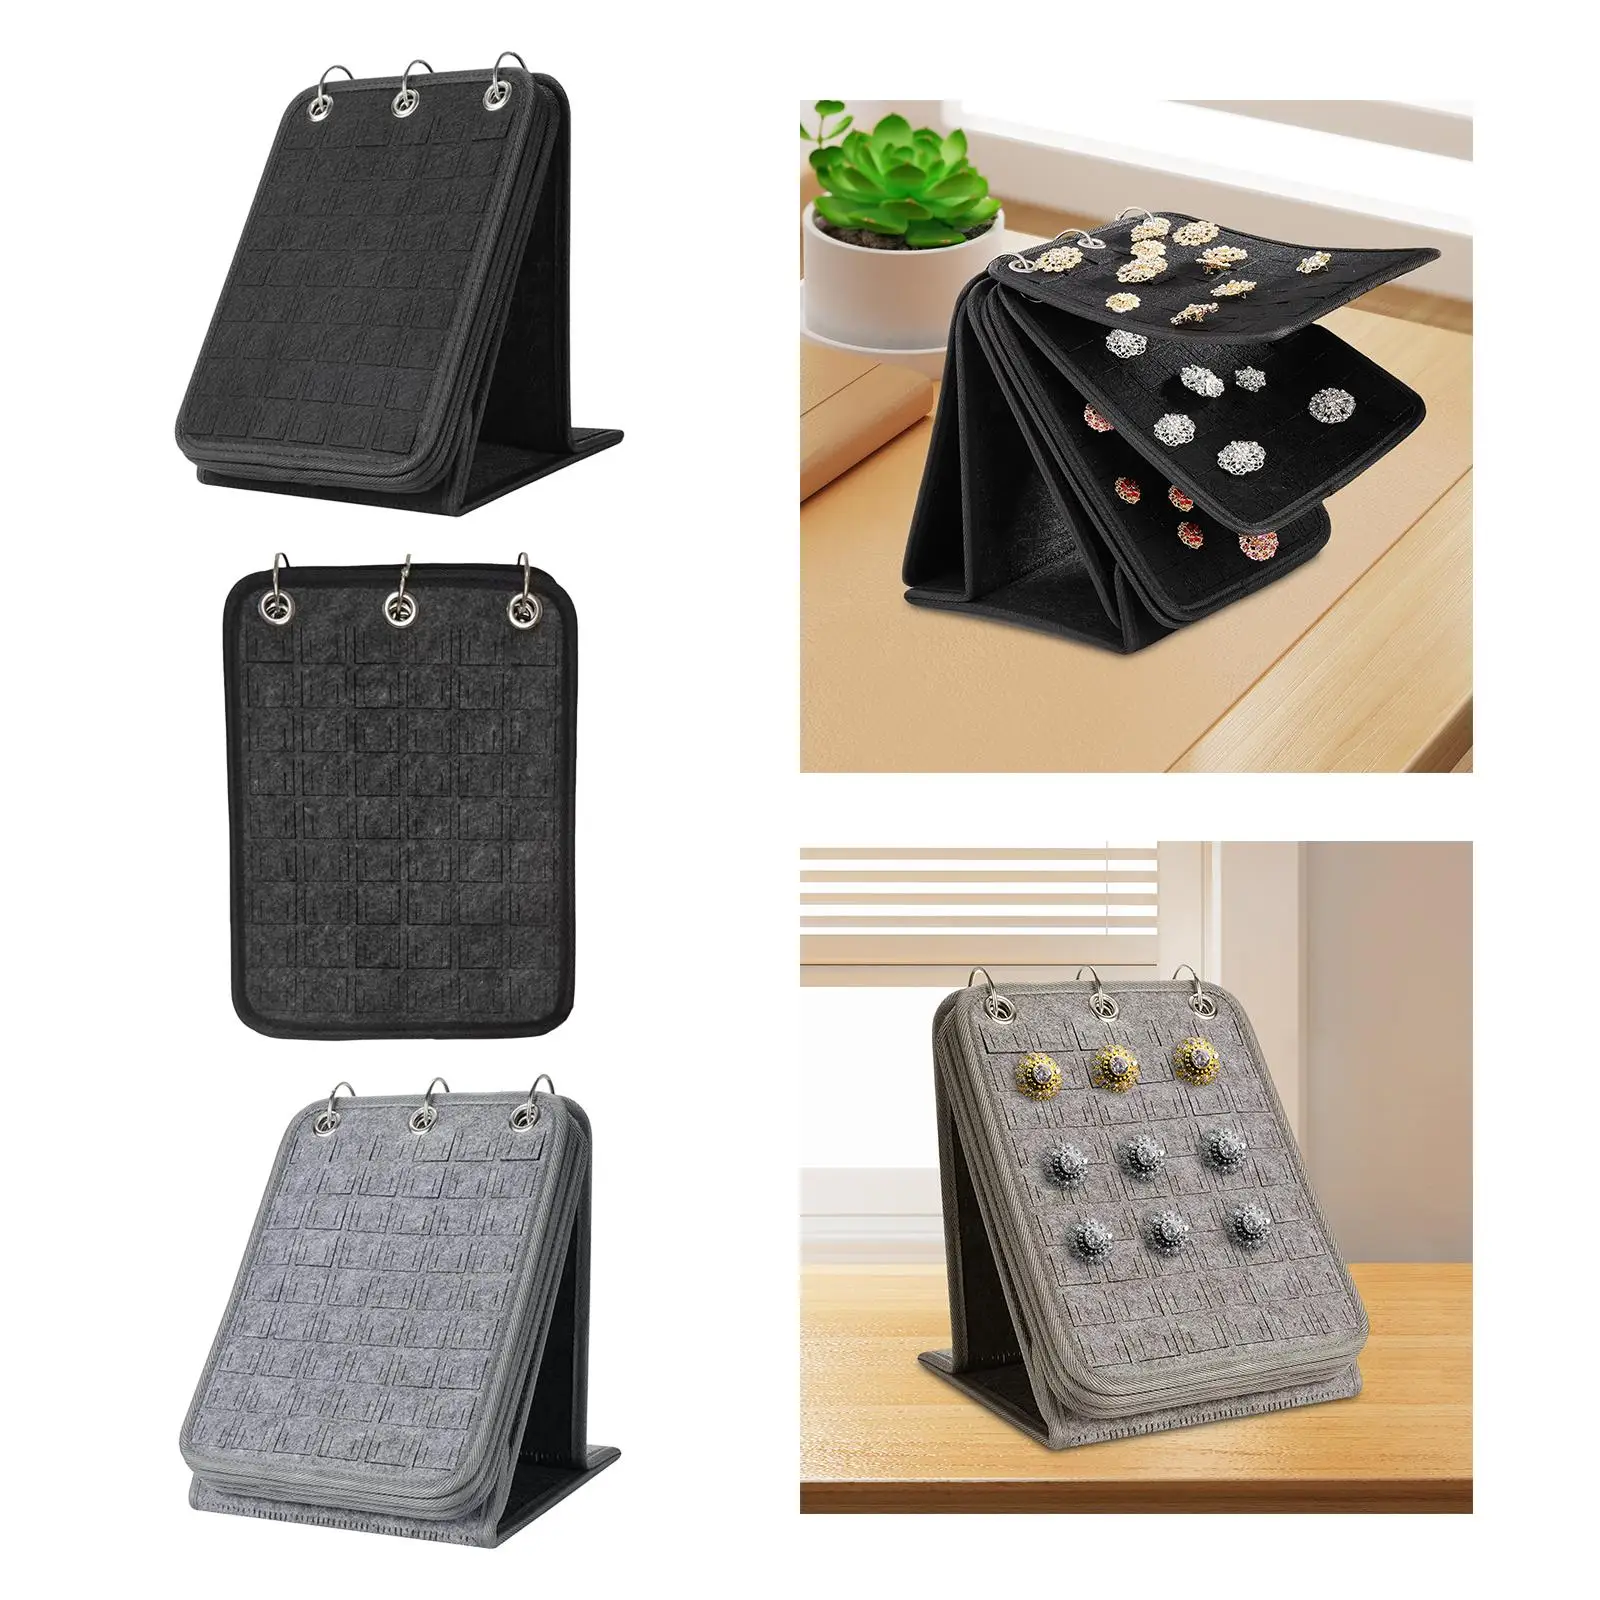 Pin Display Holder with 3 Binders and 5 Pages Creative Pin Display Binder